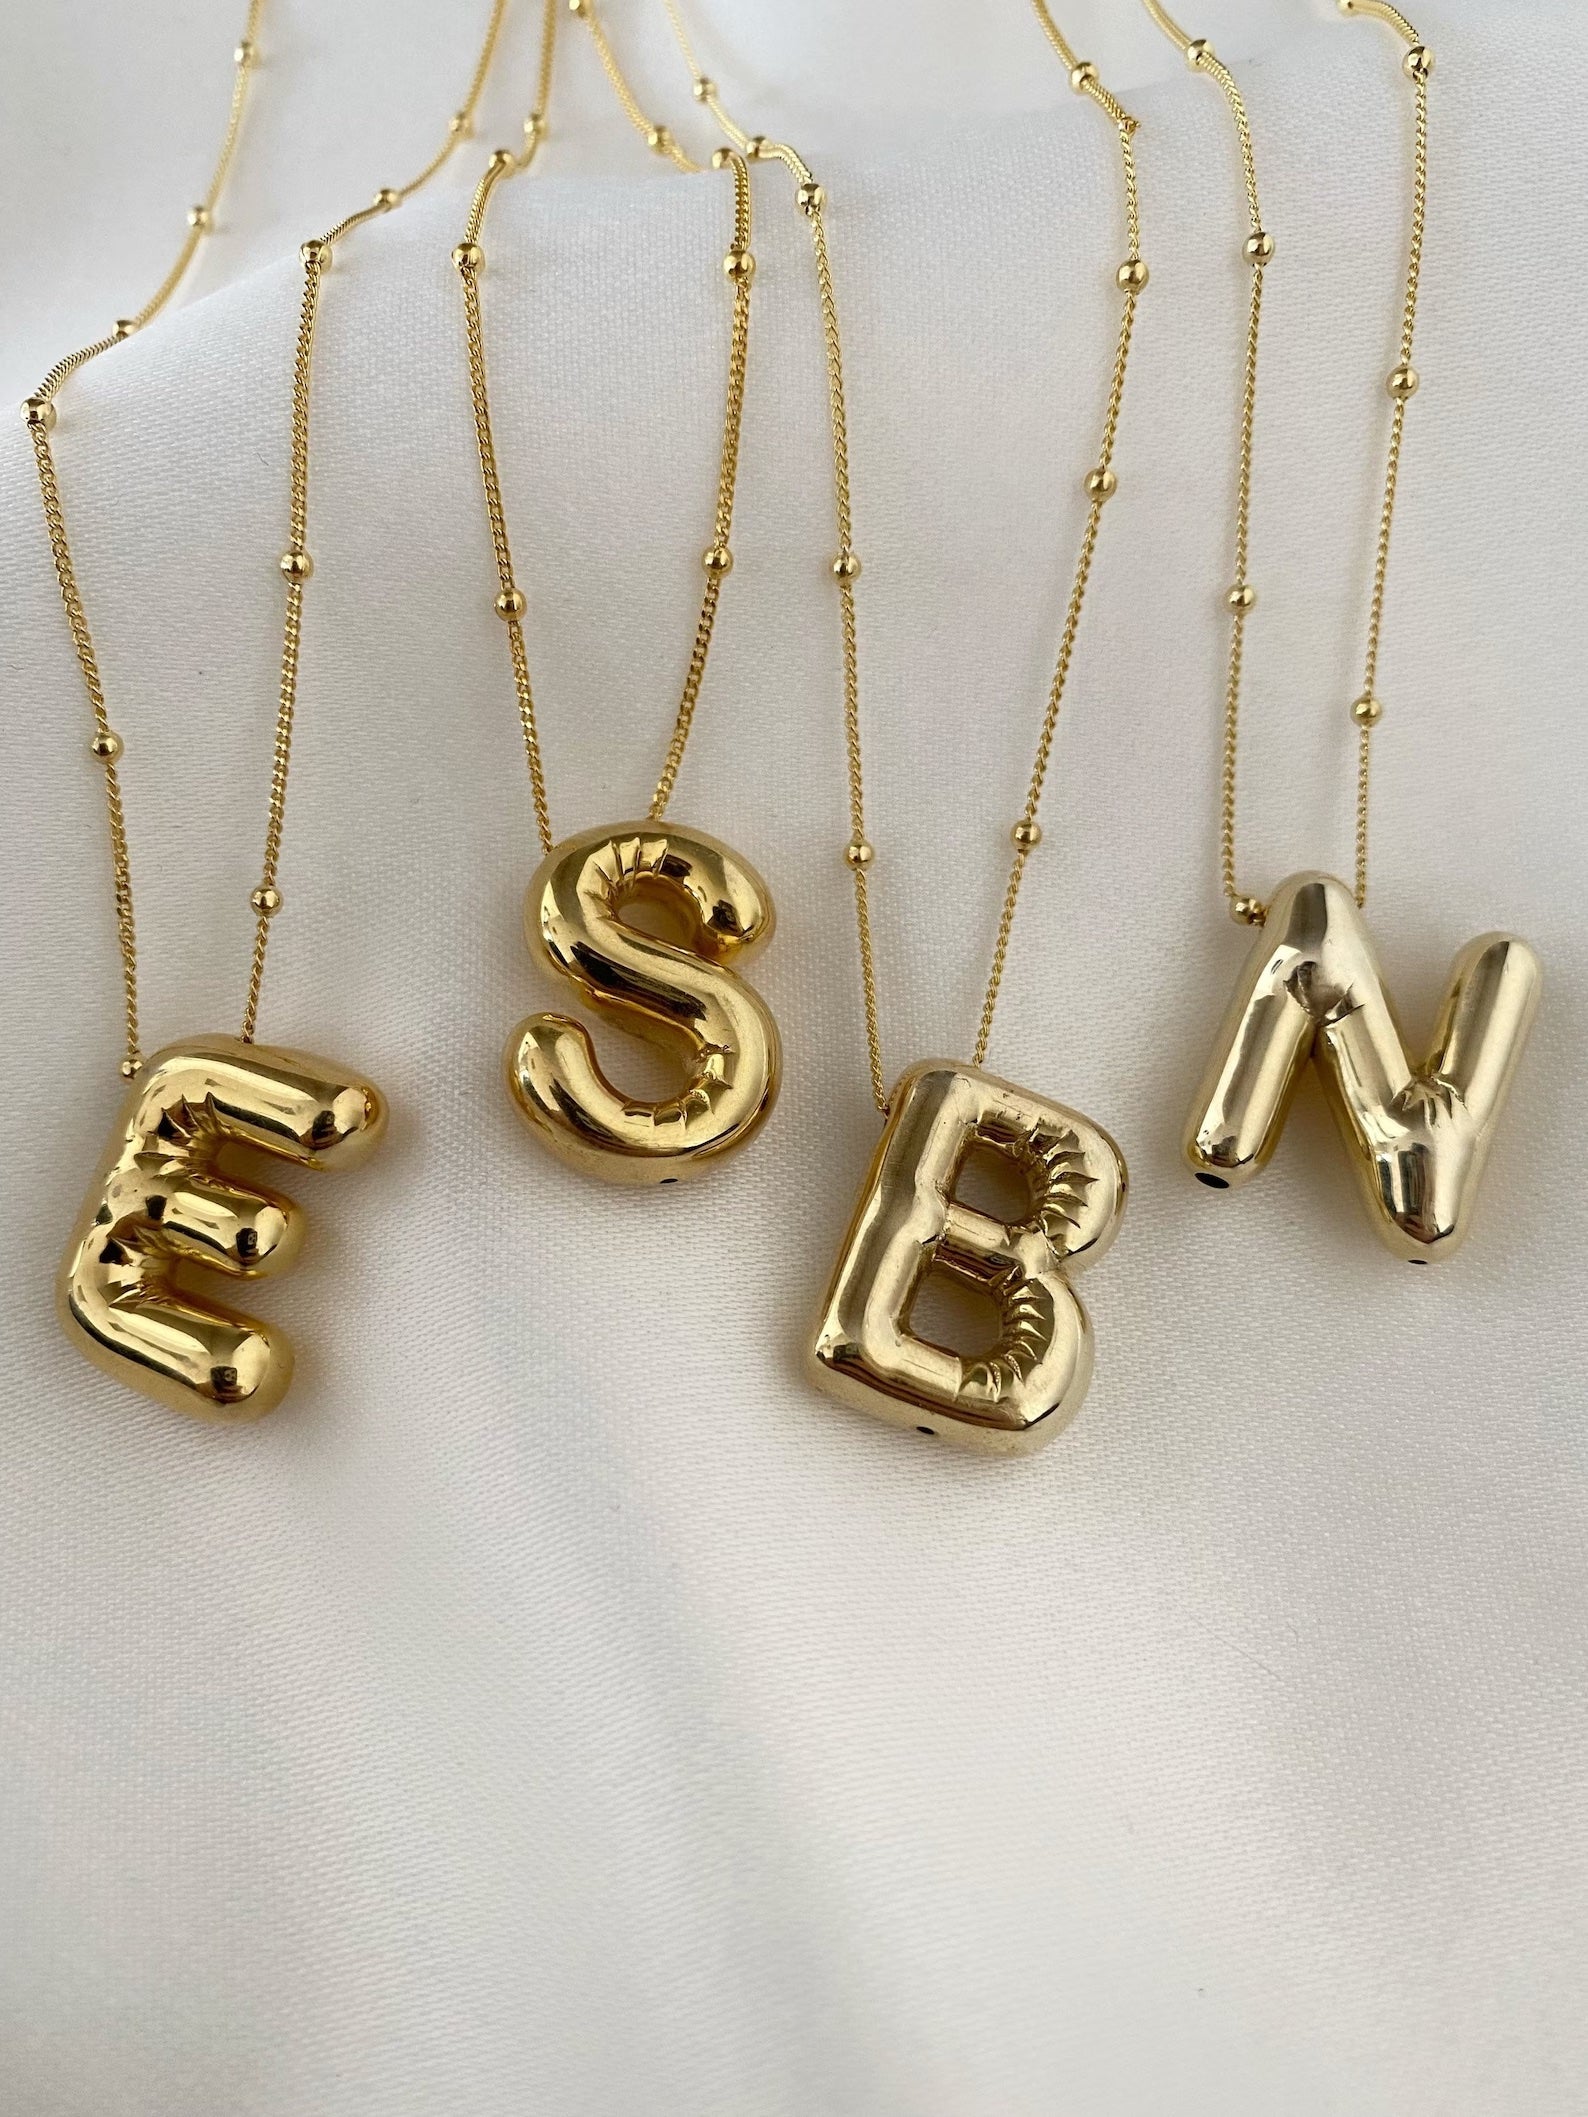 Our Balloon Initial Necklace!🎈🎈😍 #shopalexandramadison | Instagram